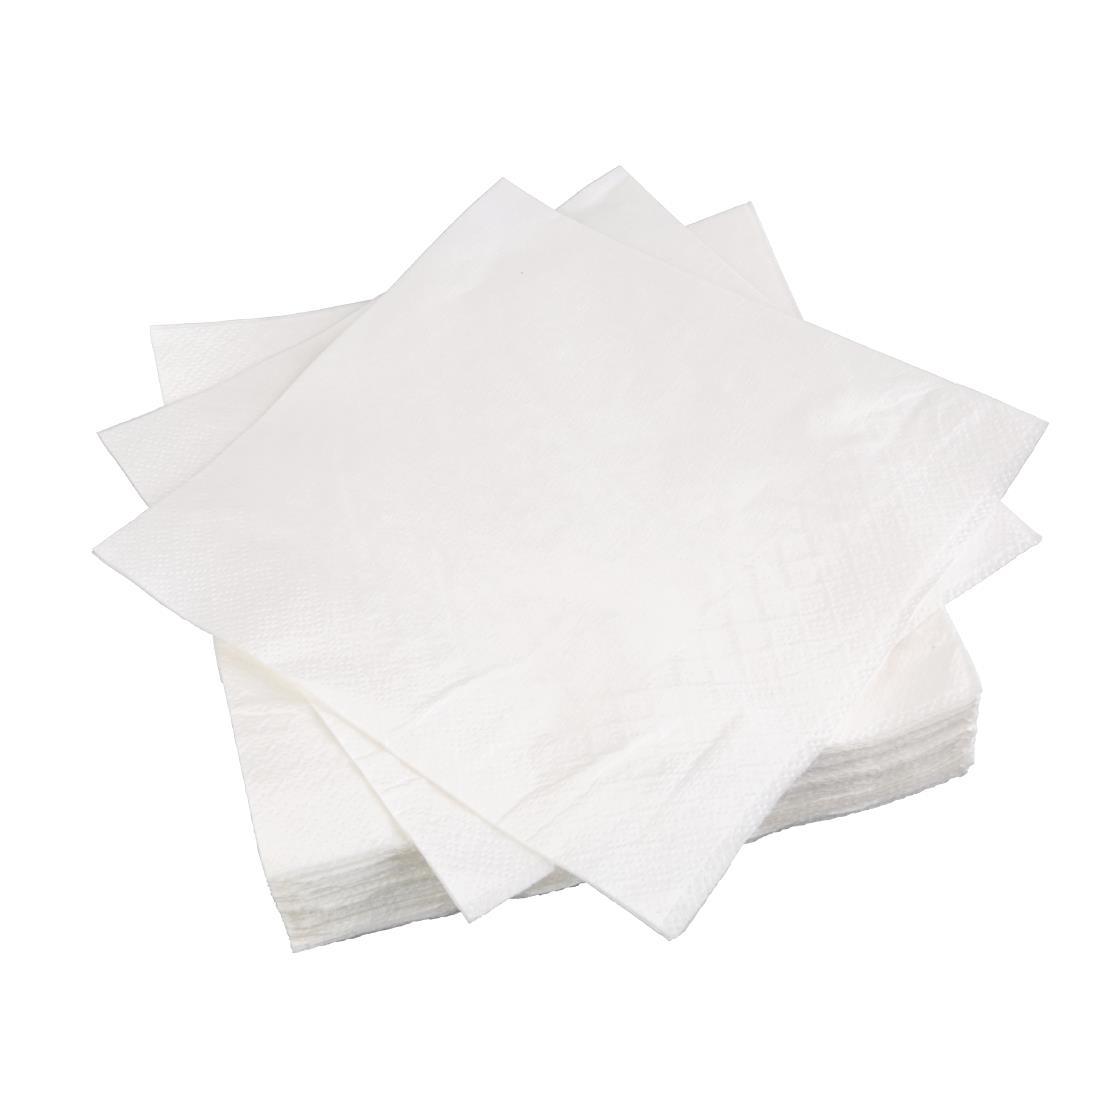 Fiesta Recyclable Lunch Napkin White 30x30cm 2ply 1/4 Fold (Pack of 2000) - CM562  - 3